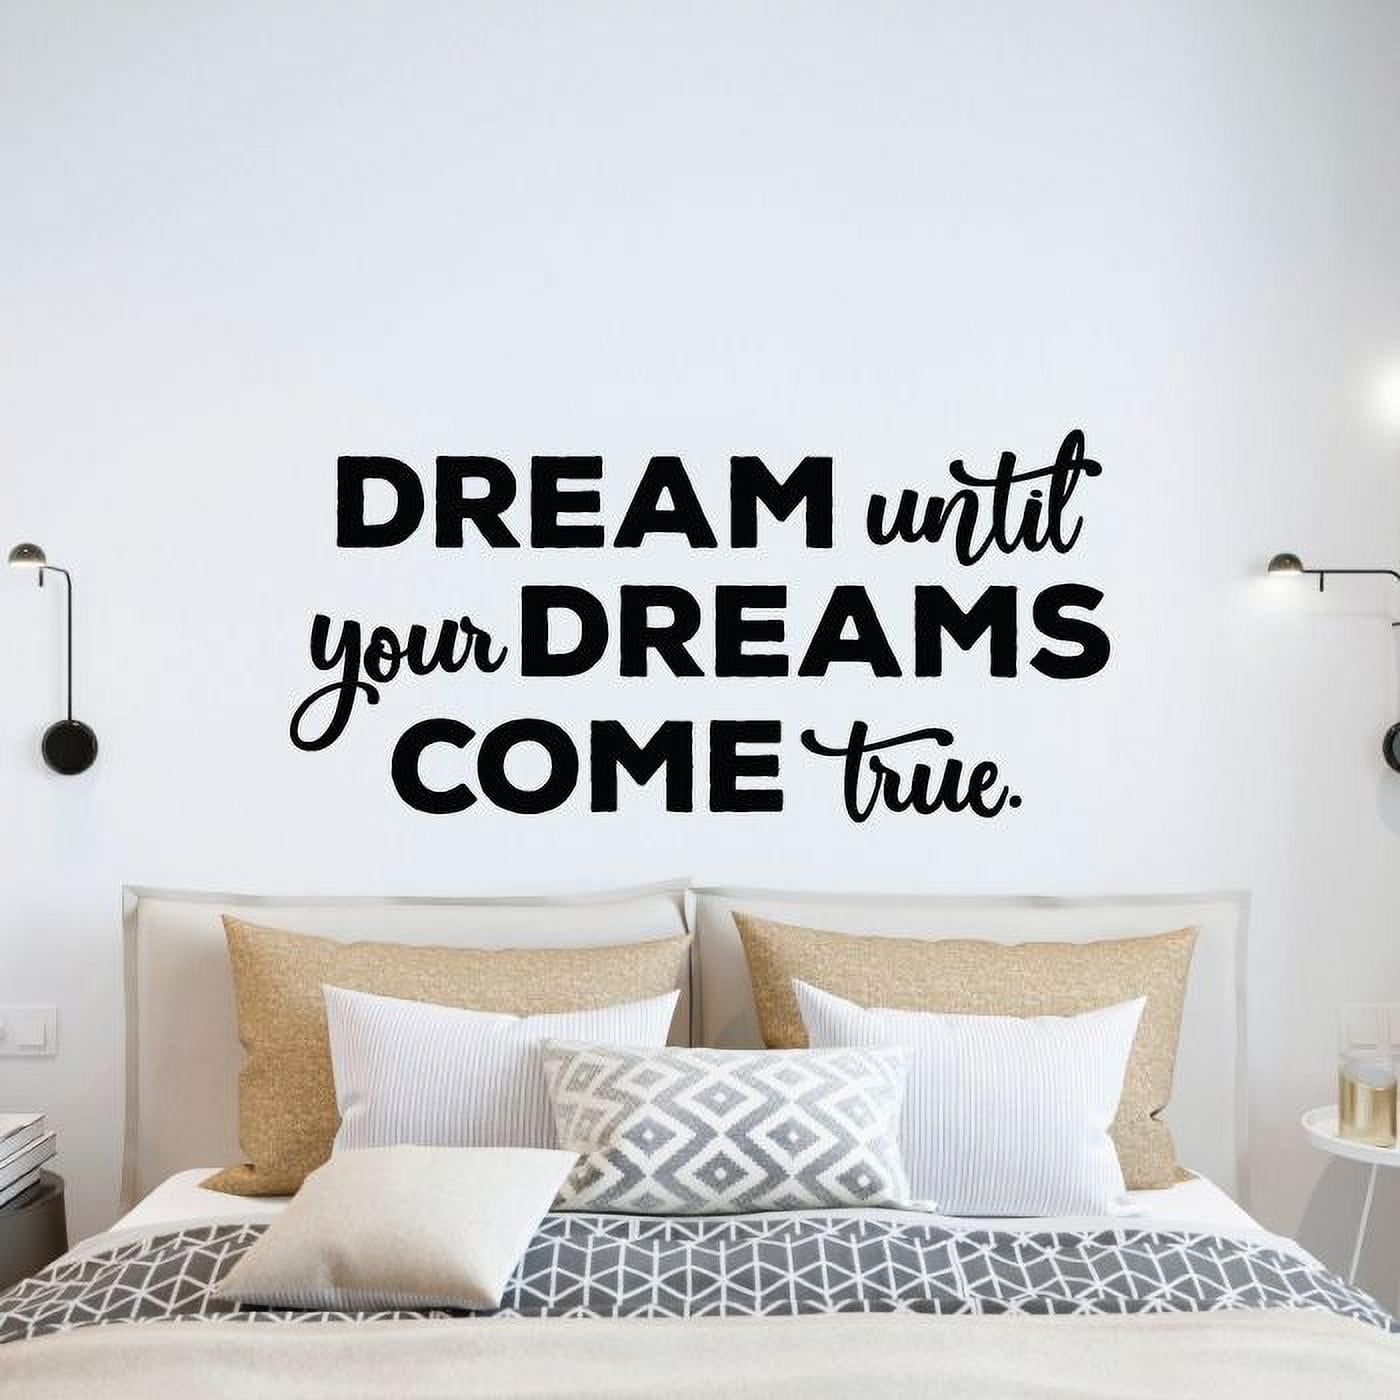 Wall Sticker Don't Dream your life Live Your Dreams Home Decals Bedroom quote D 